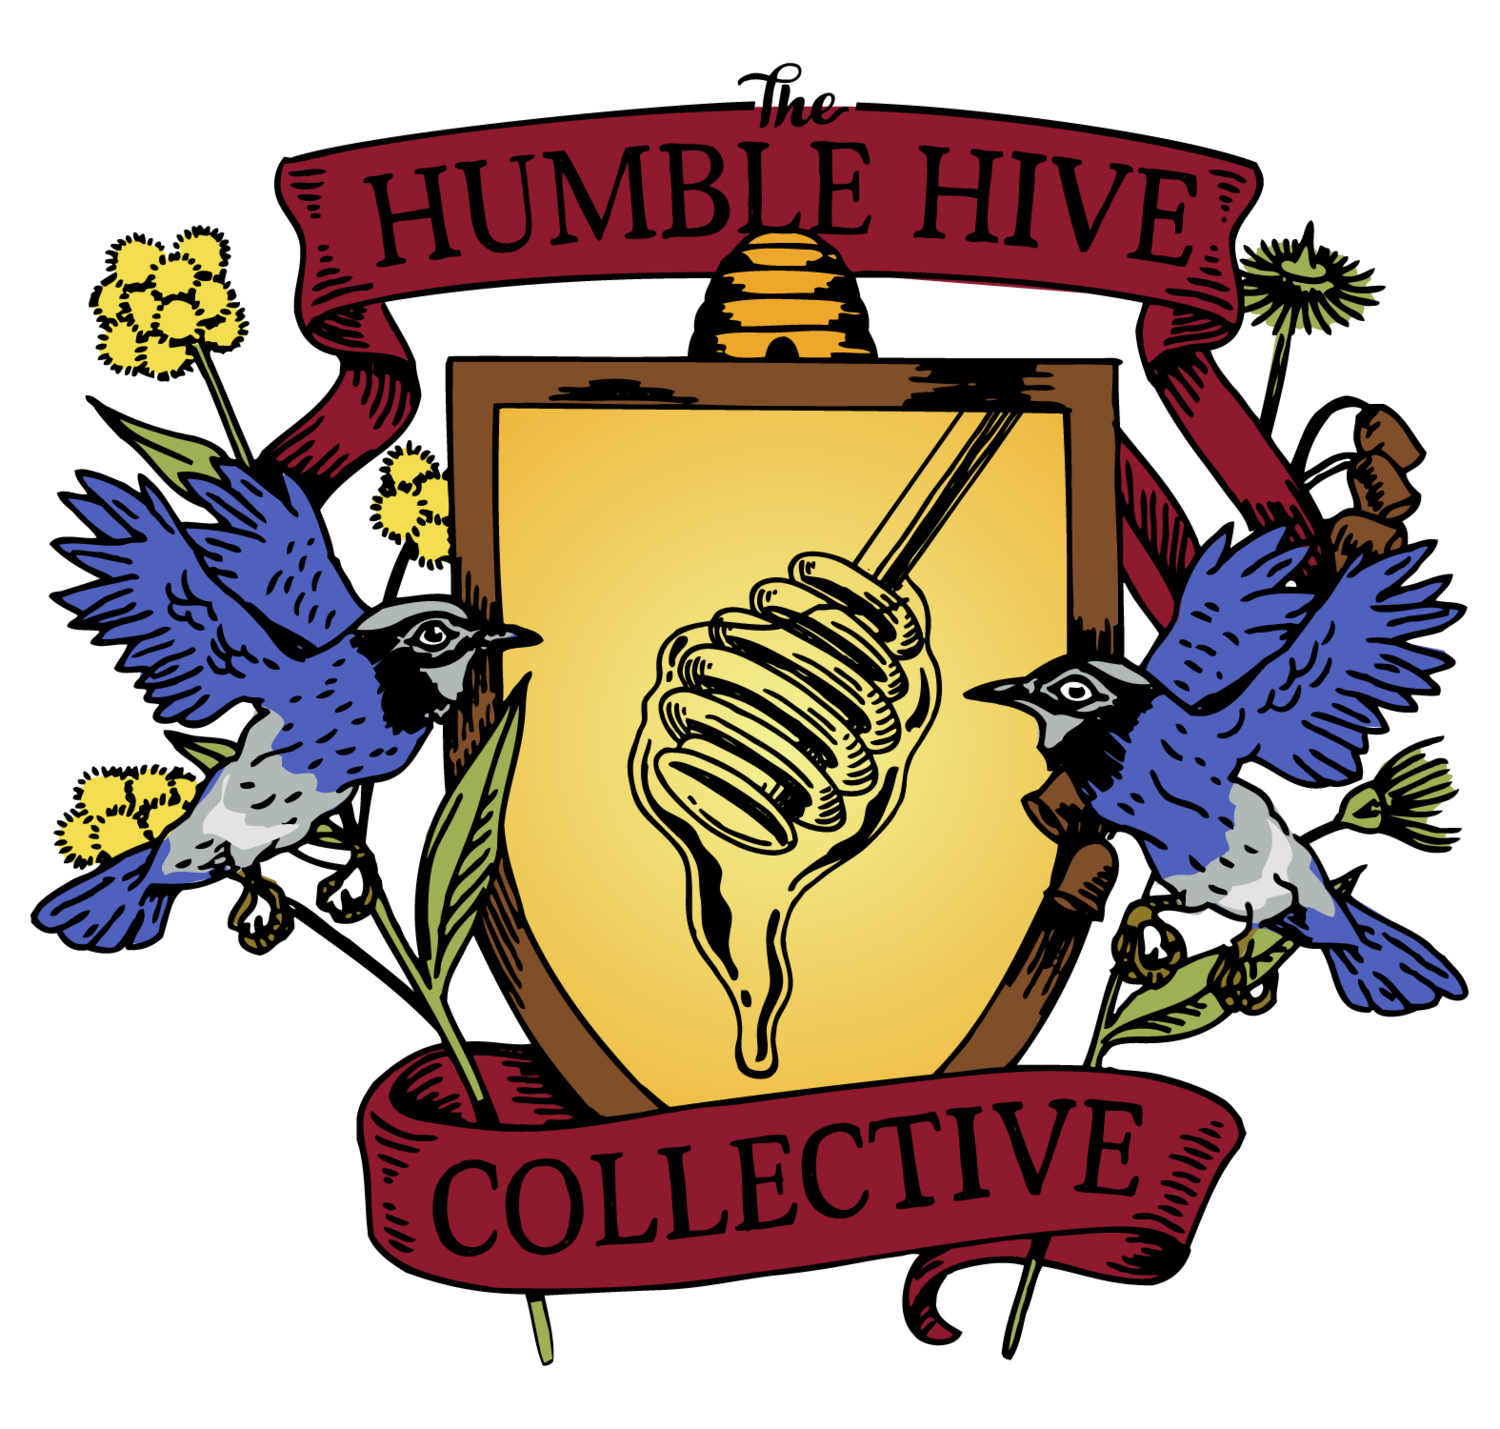 The Humble Hive Collective